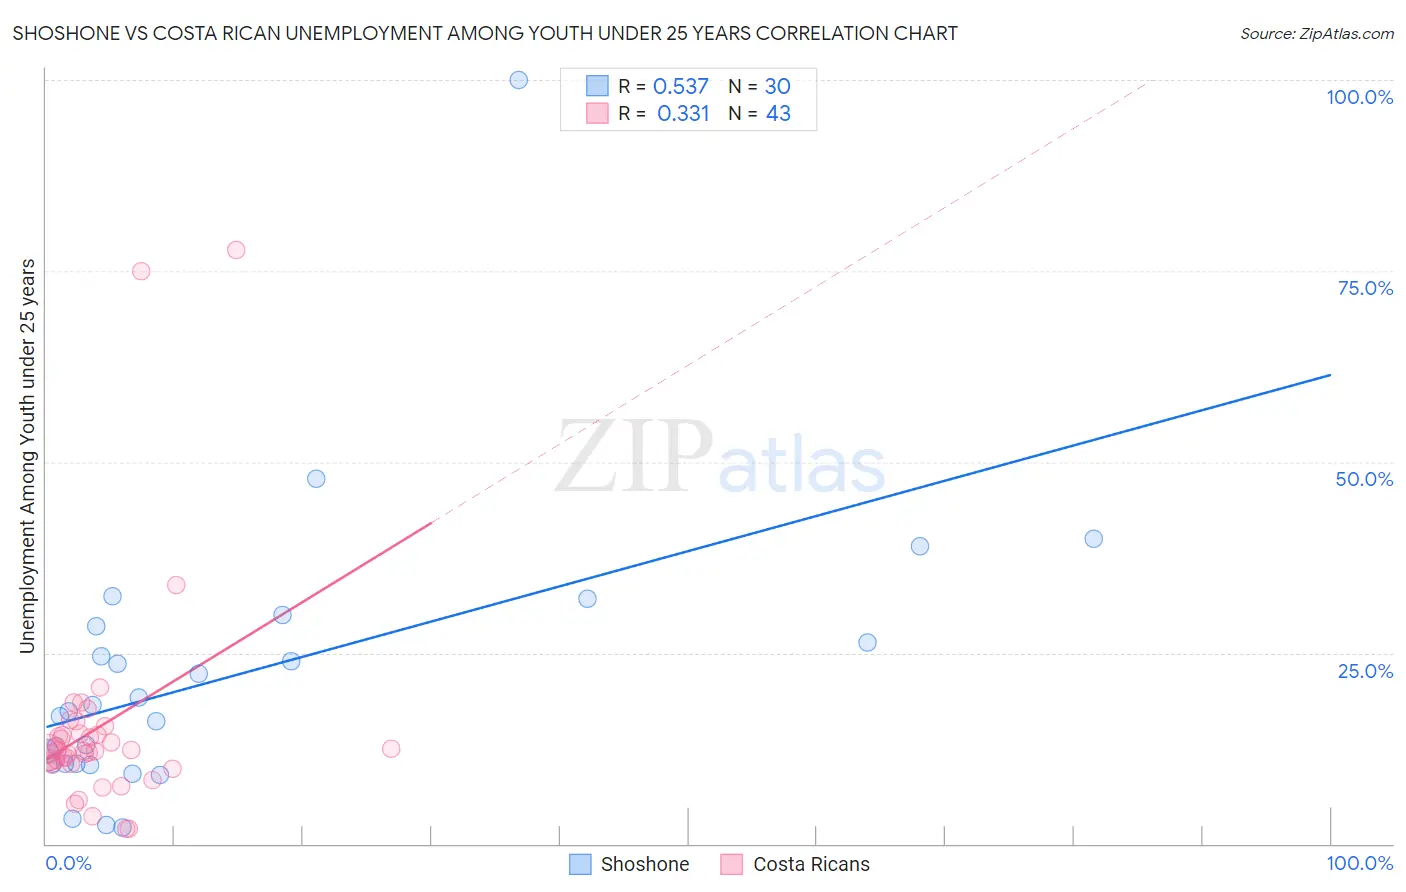 Shoshone vs Costa Rican Unemployment Among Youth under 25 years